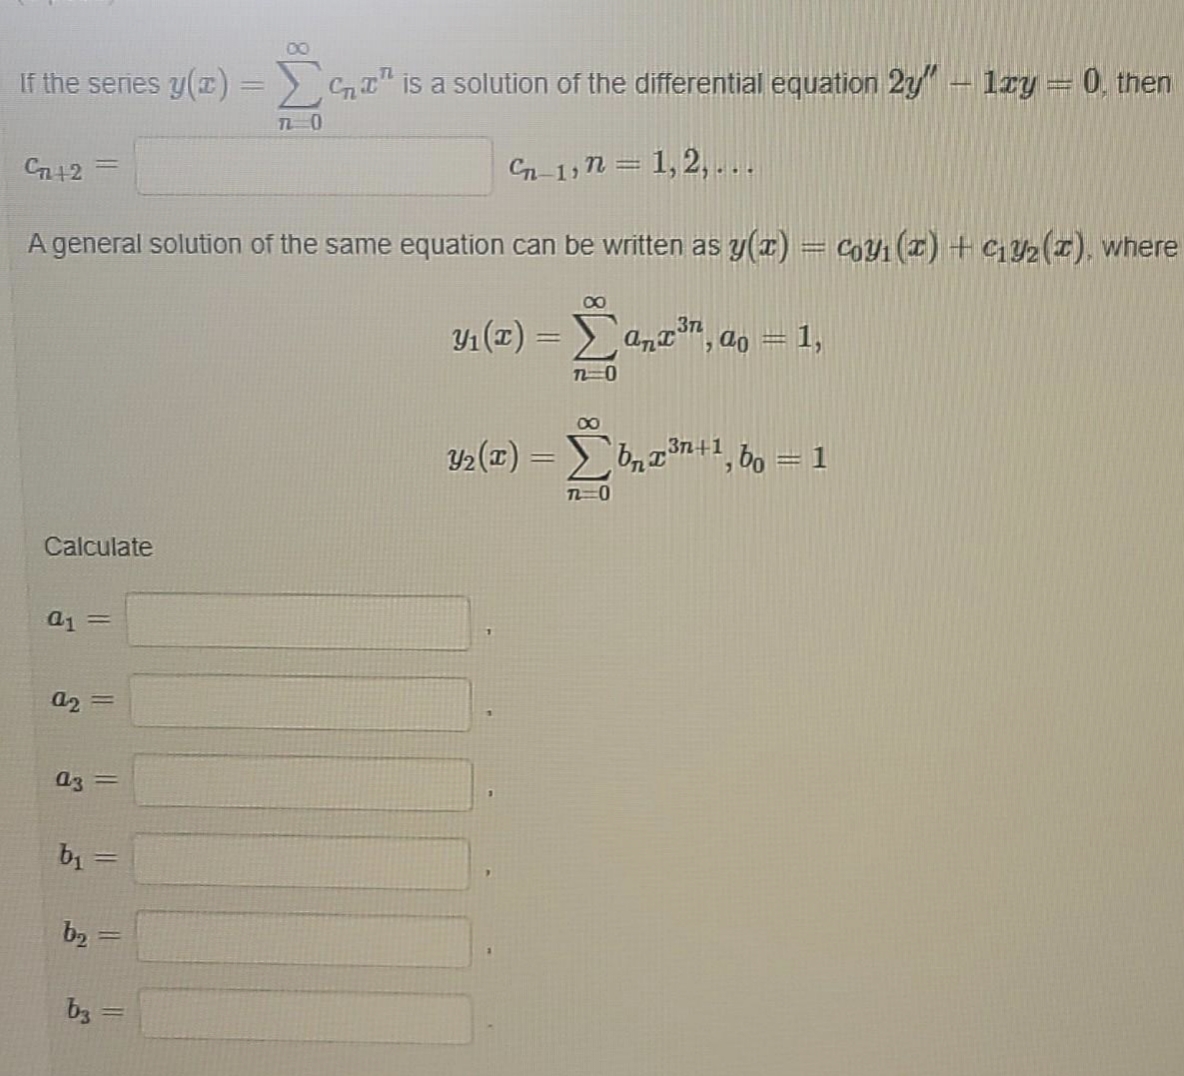 If the series y(z)=> CnT" is a solution of the differential equation 2y" – 1ry = 0, then
7-0
C+2
G-1, n = 1, 2, -..
A general solution of the same equation can be written as y(z) = coy (z) + c2(x), where
%3D
Y1 (1) =
1,
00
Y2 (T) = bnTn-+1, bo = 1
%3D
Calculate
a2
a3 =
b2
bz
%3D
